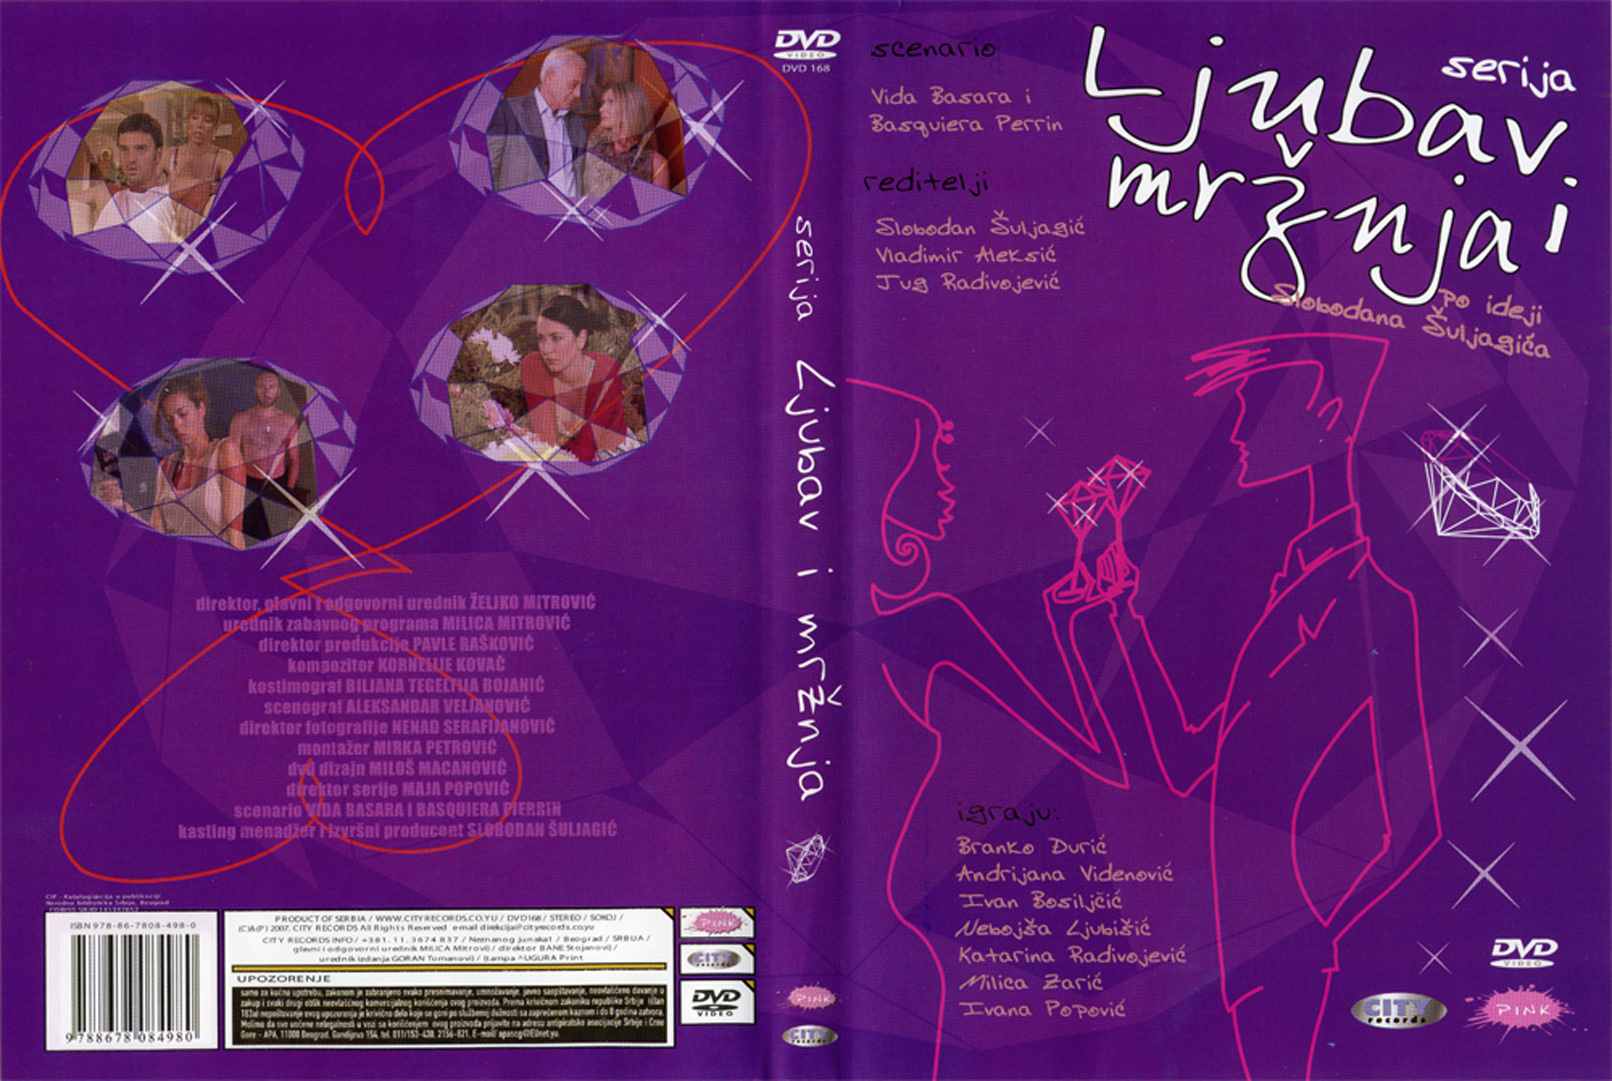 Click to view full size image -  DVD Cover - L - ljubav_i_mrznja_original_dvd - ljubav_i_mrznja_original_dvd.jpg